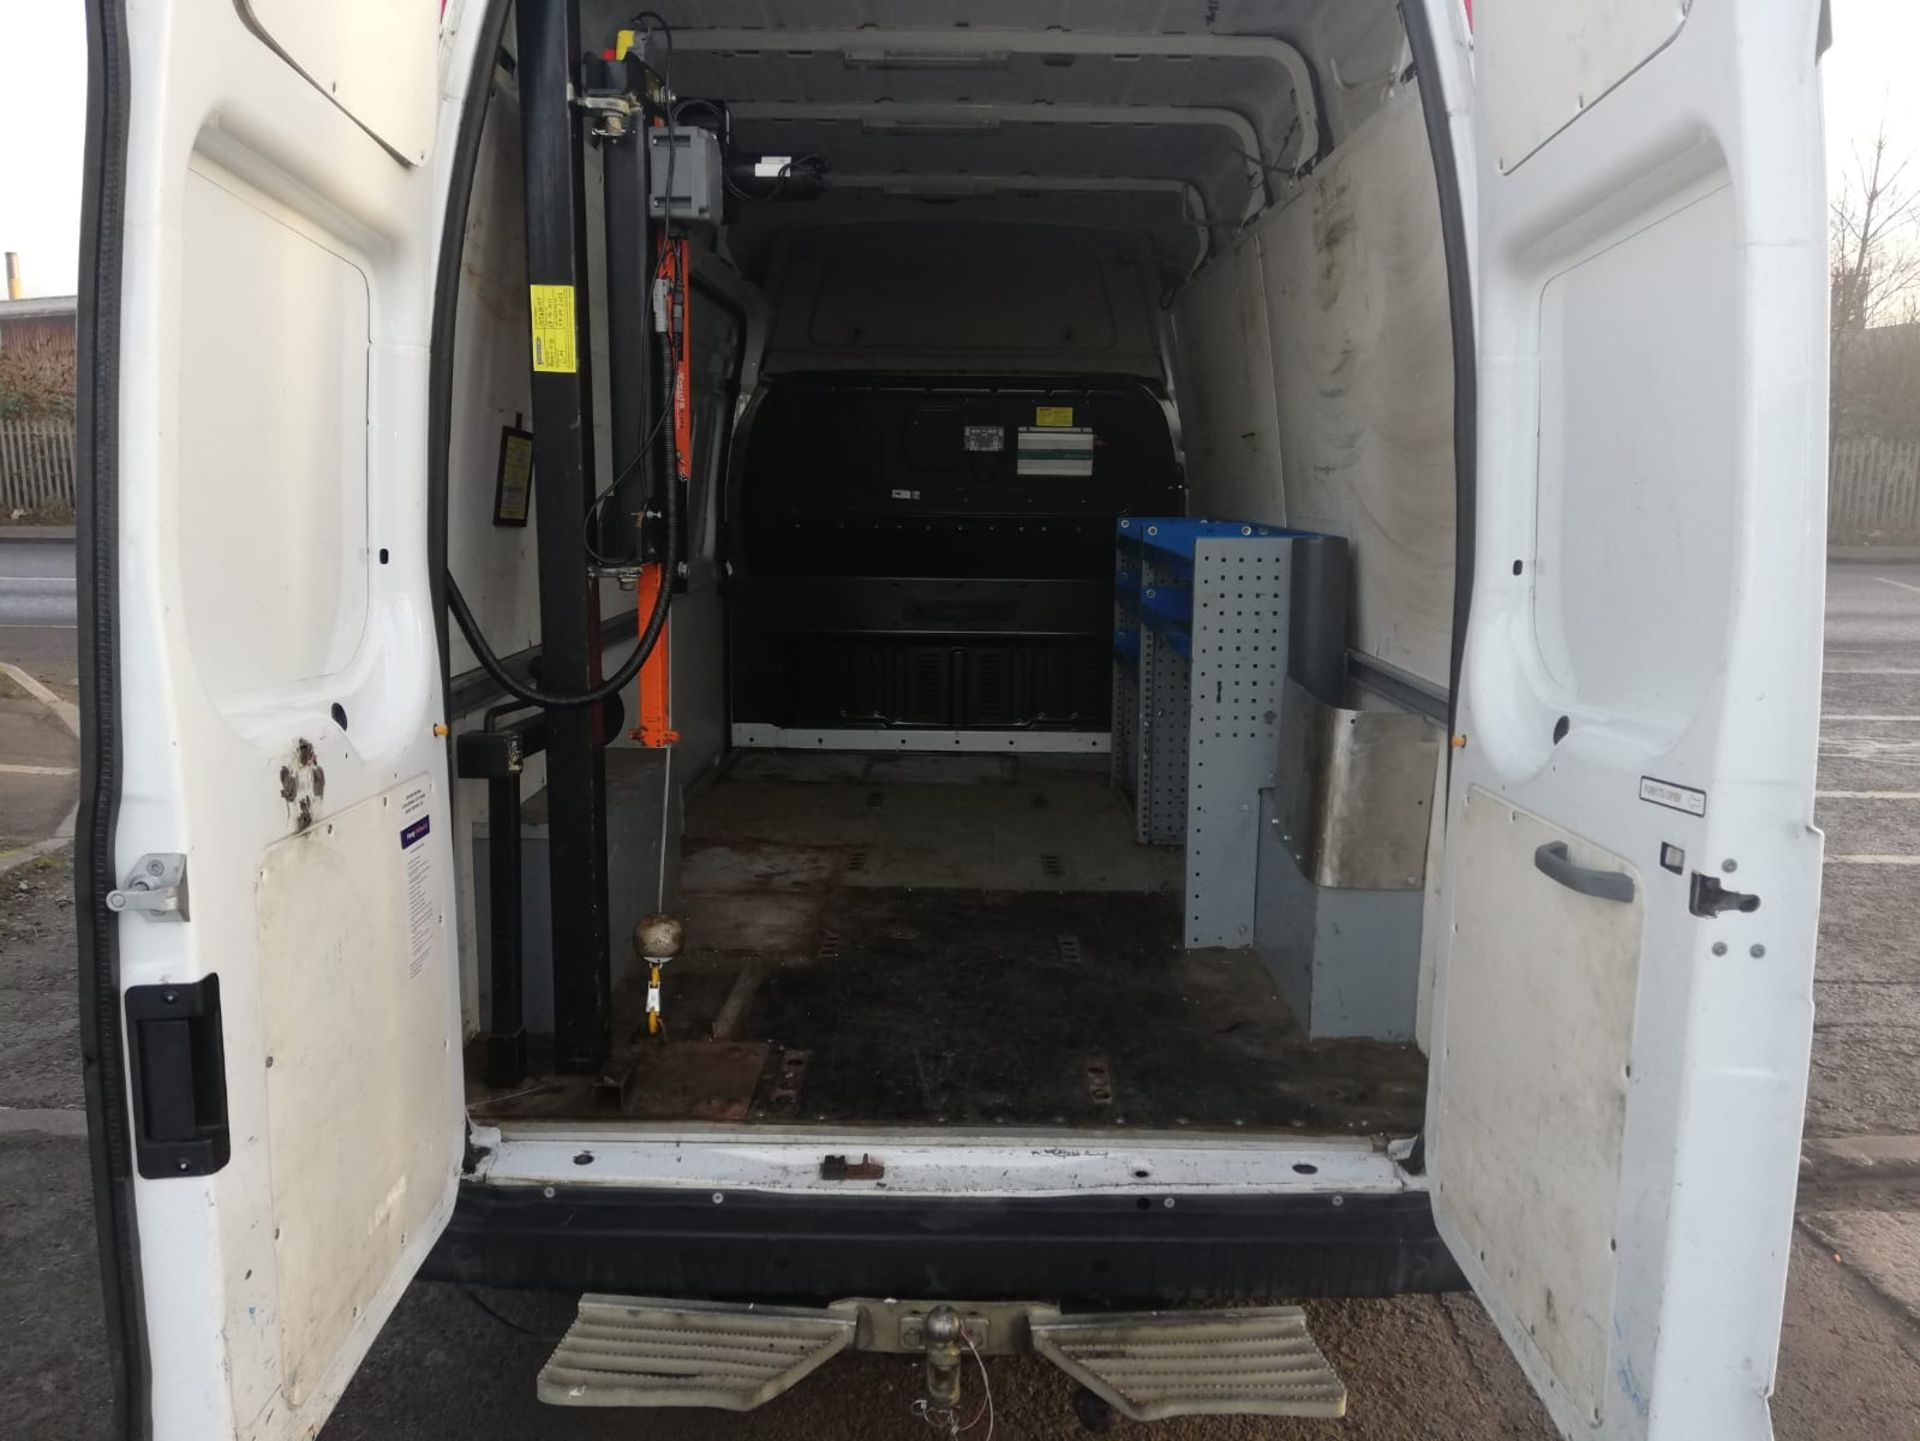 2011/61 FORD TRANSIT 125 T350 TREND FWD LWB HIGH TOP PANEL VAN, 92K MILES, REAR HIAB CRANE FITTED - Image 9 of 9